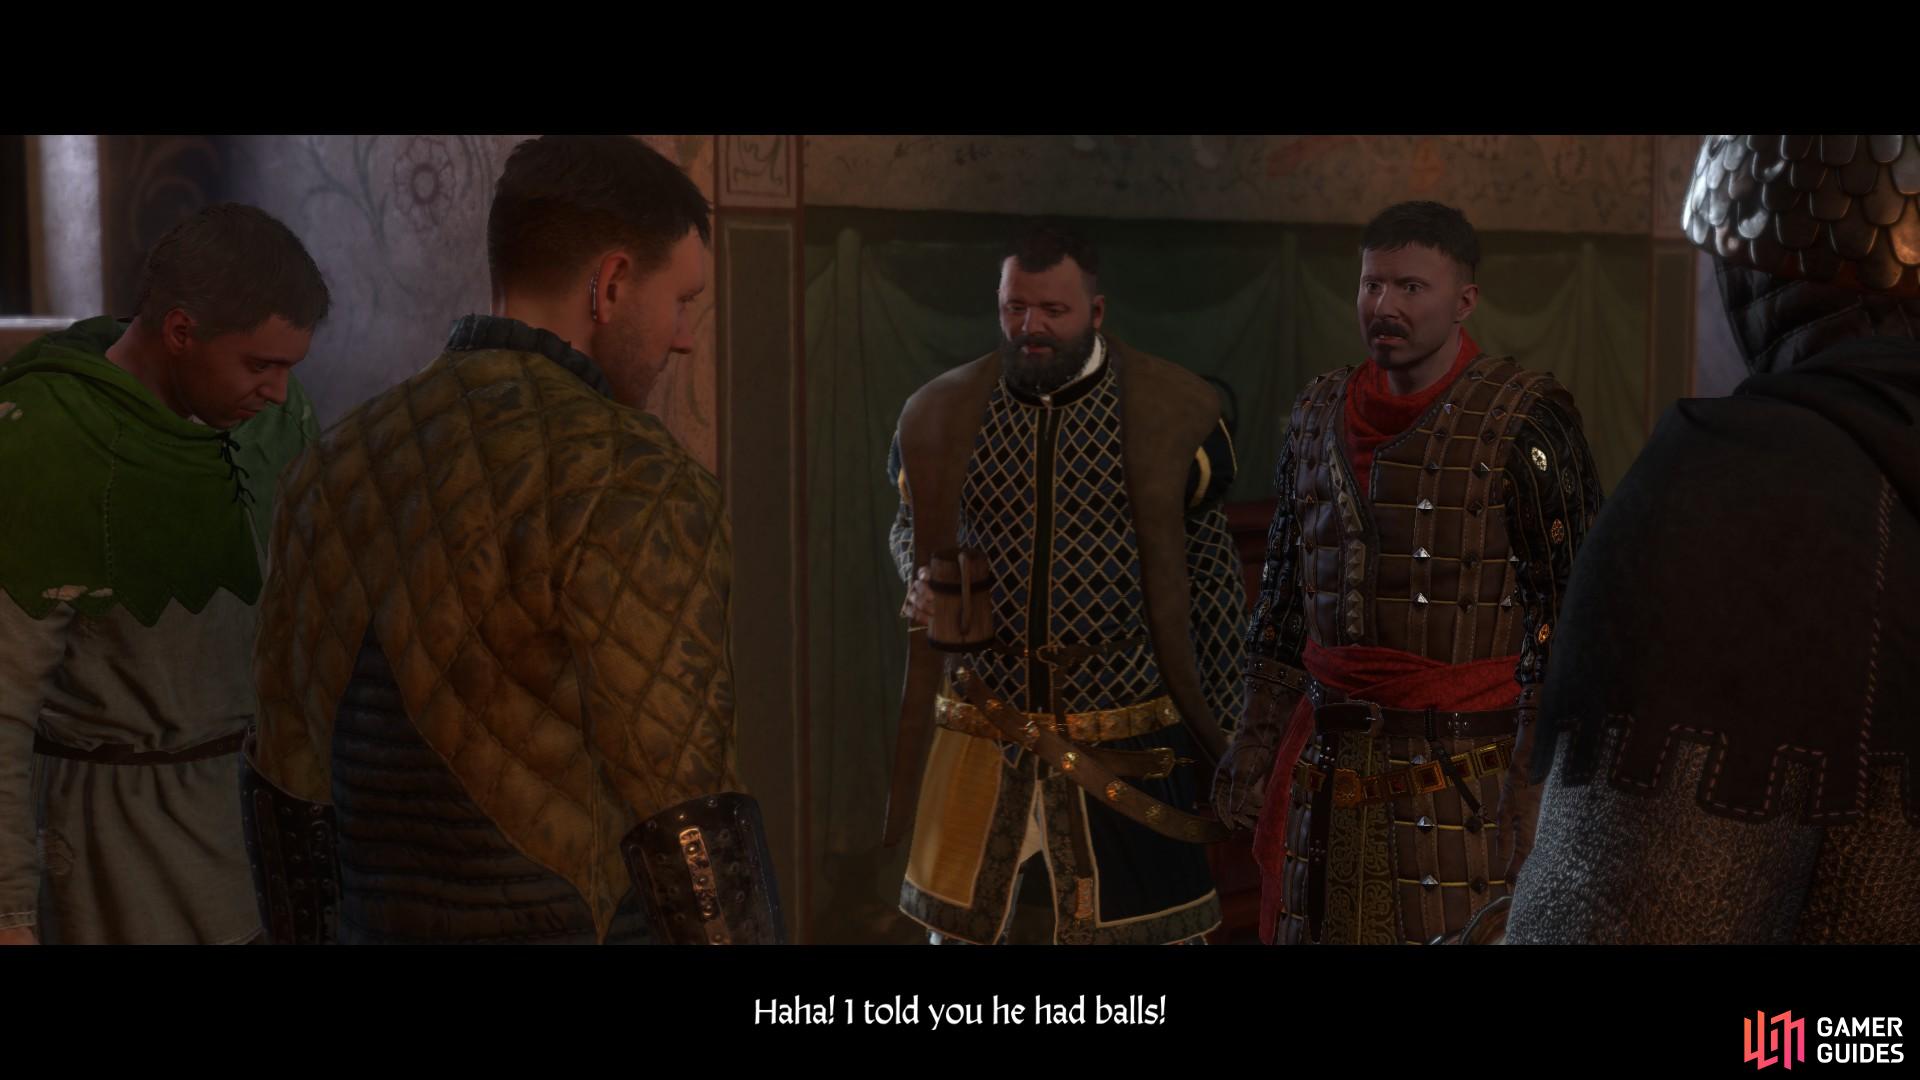 When you return to Rattay you will have the opportunity to betray Zbyshek or reward him.